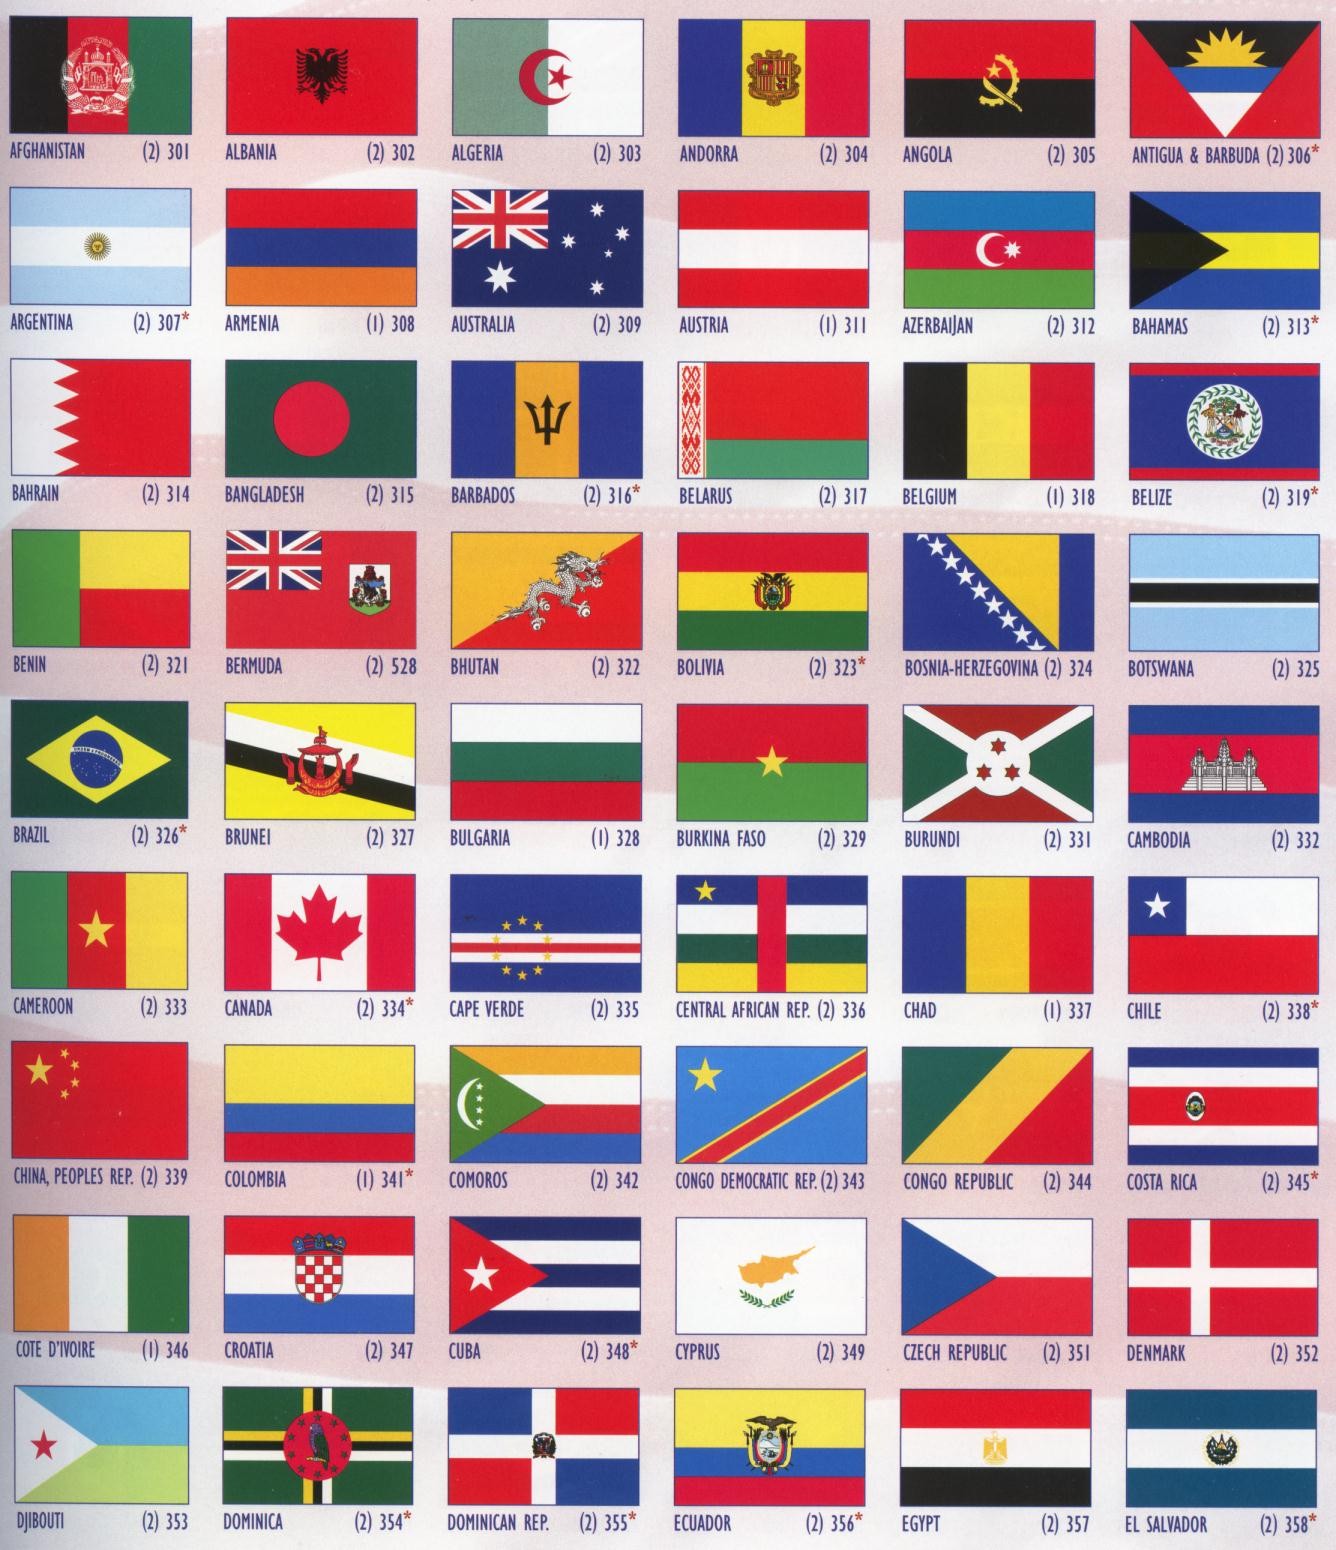 6 Best Images of International Flags Printable Pages - Printable World ...